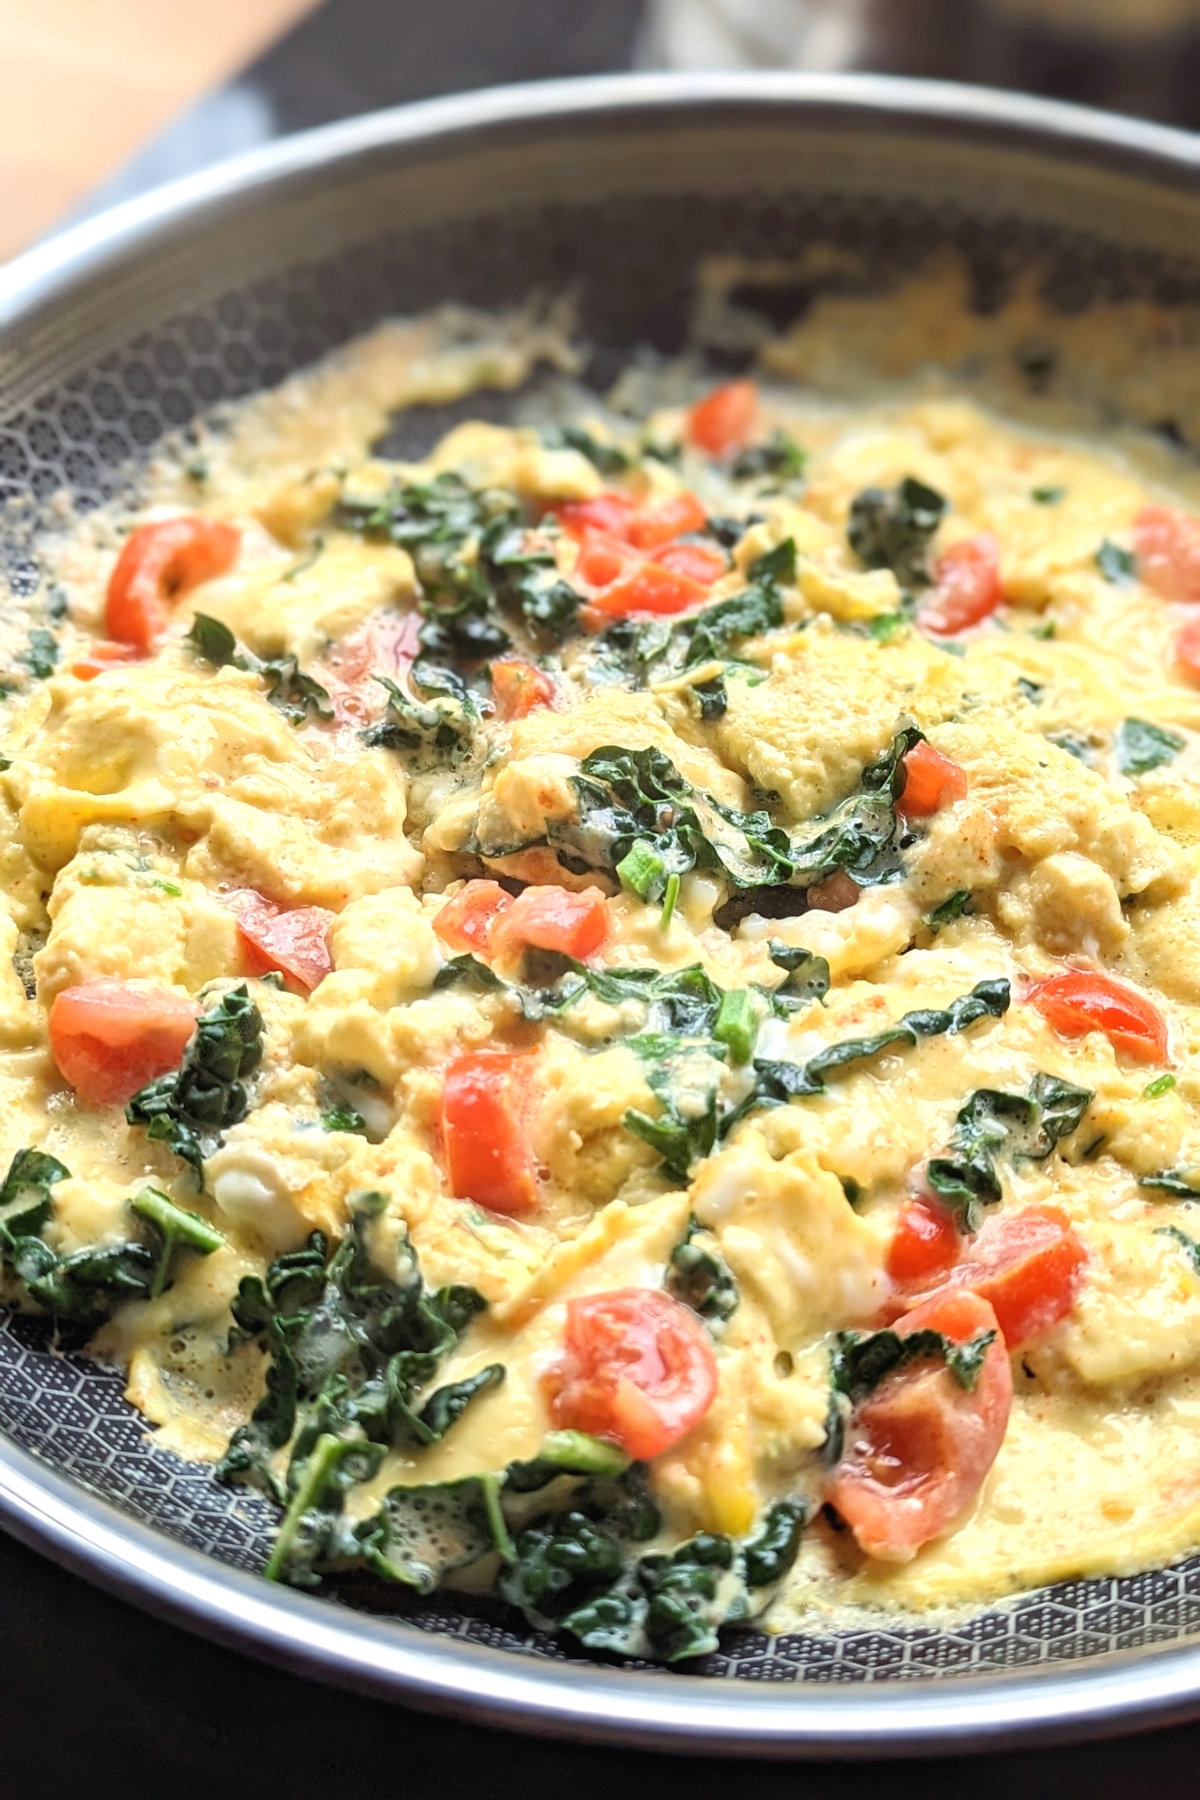 kale egg recipes healthy viral kale recipe with eggs tomatoes and parsley cayenne pepper and butter